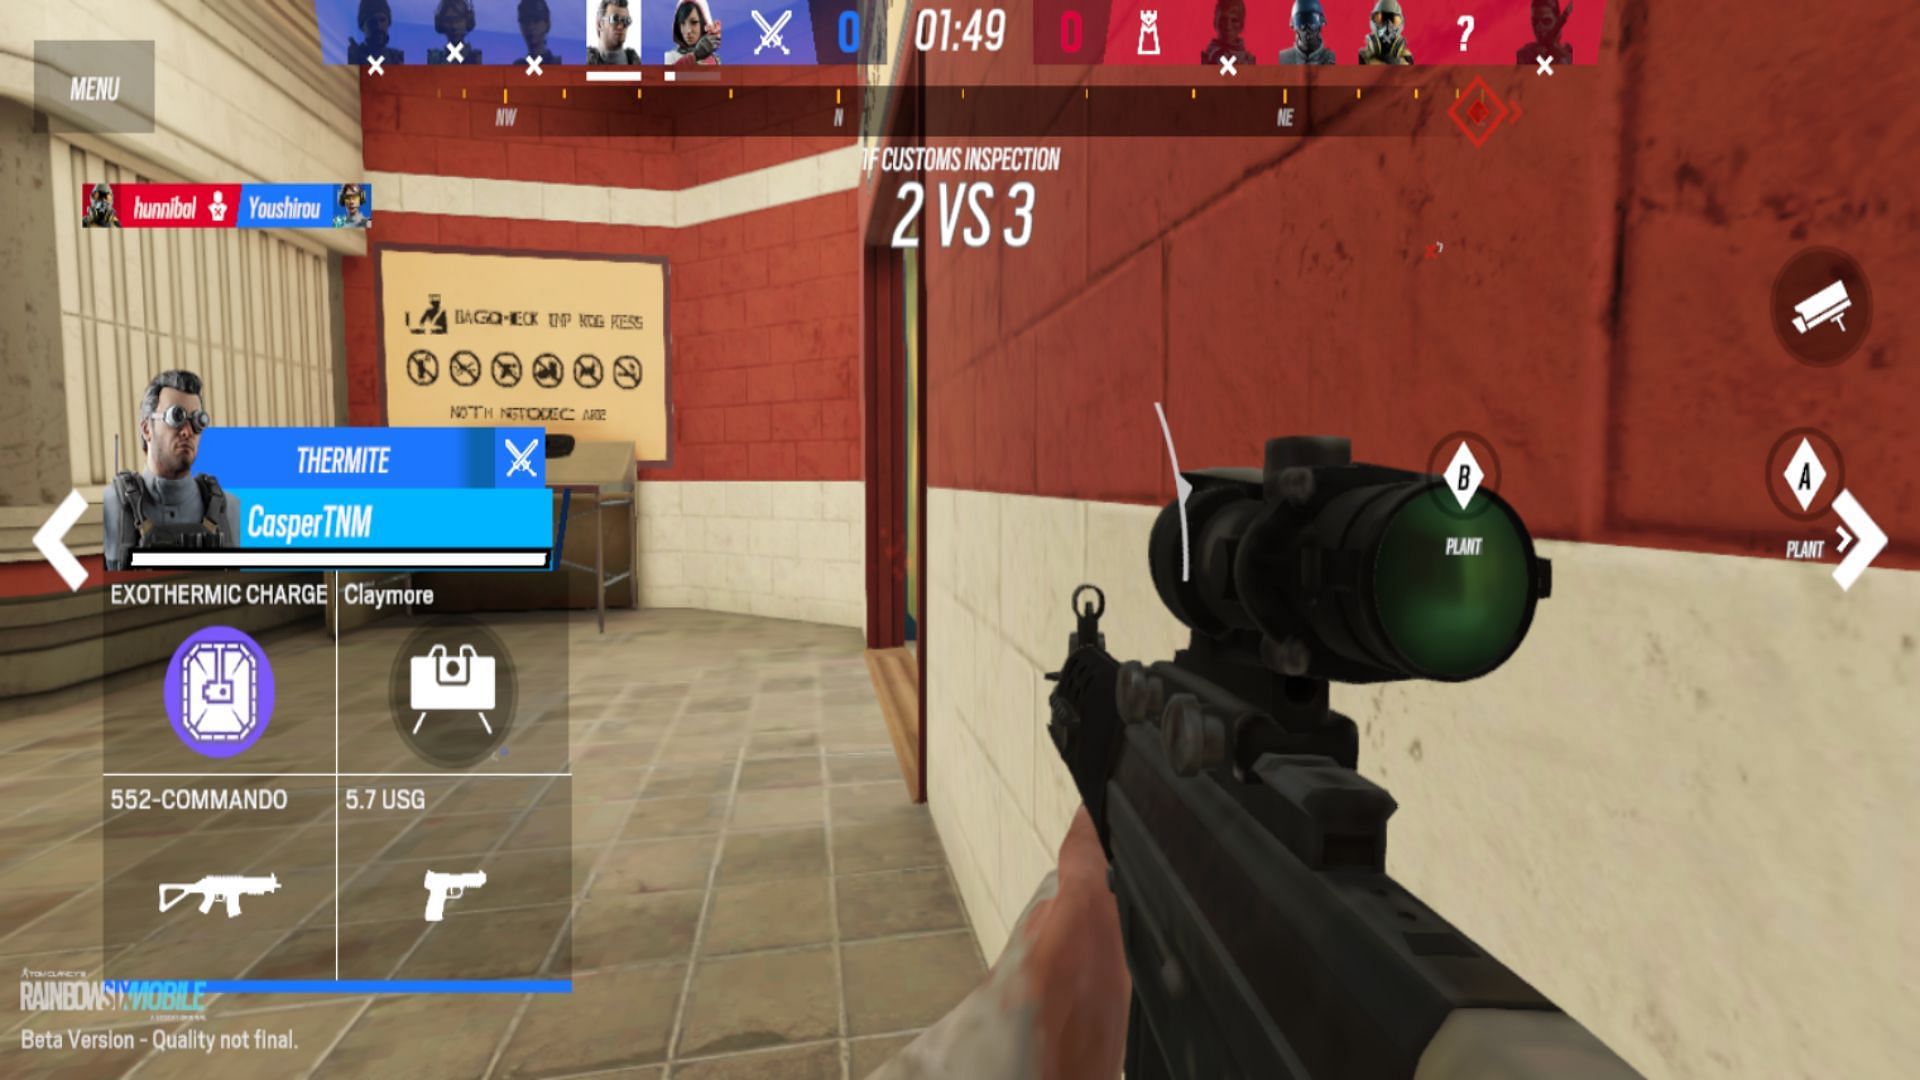 Rainbow Six Mobile Beta preview: A tactical shooter in the making, albeit  with flaws